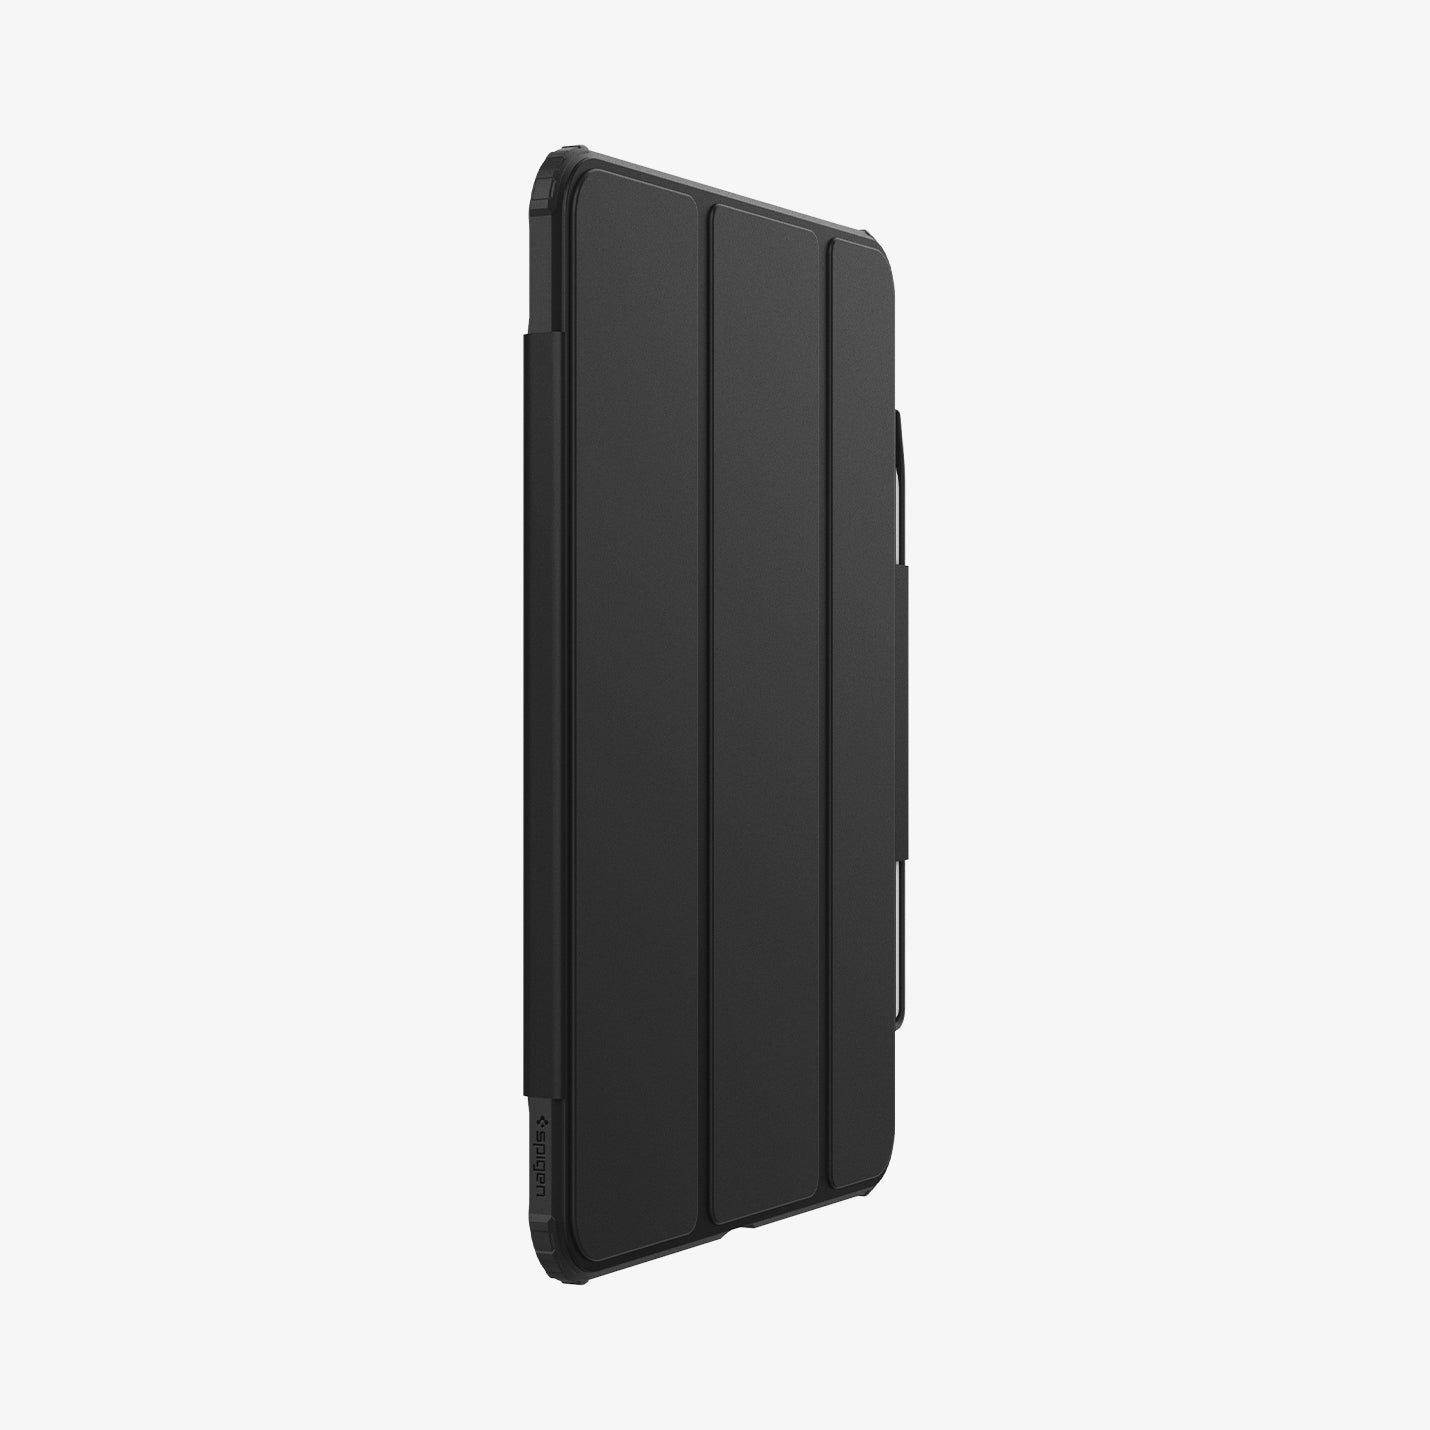 ACS07016 - iPad Pro 11-inch Case Ultra Hybrid Pro in Black showing the front and partial side